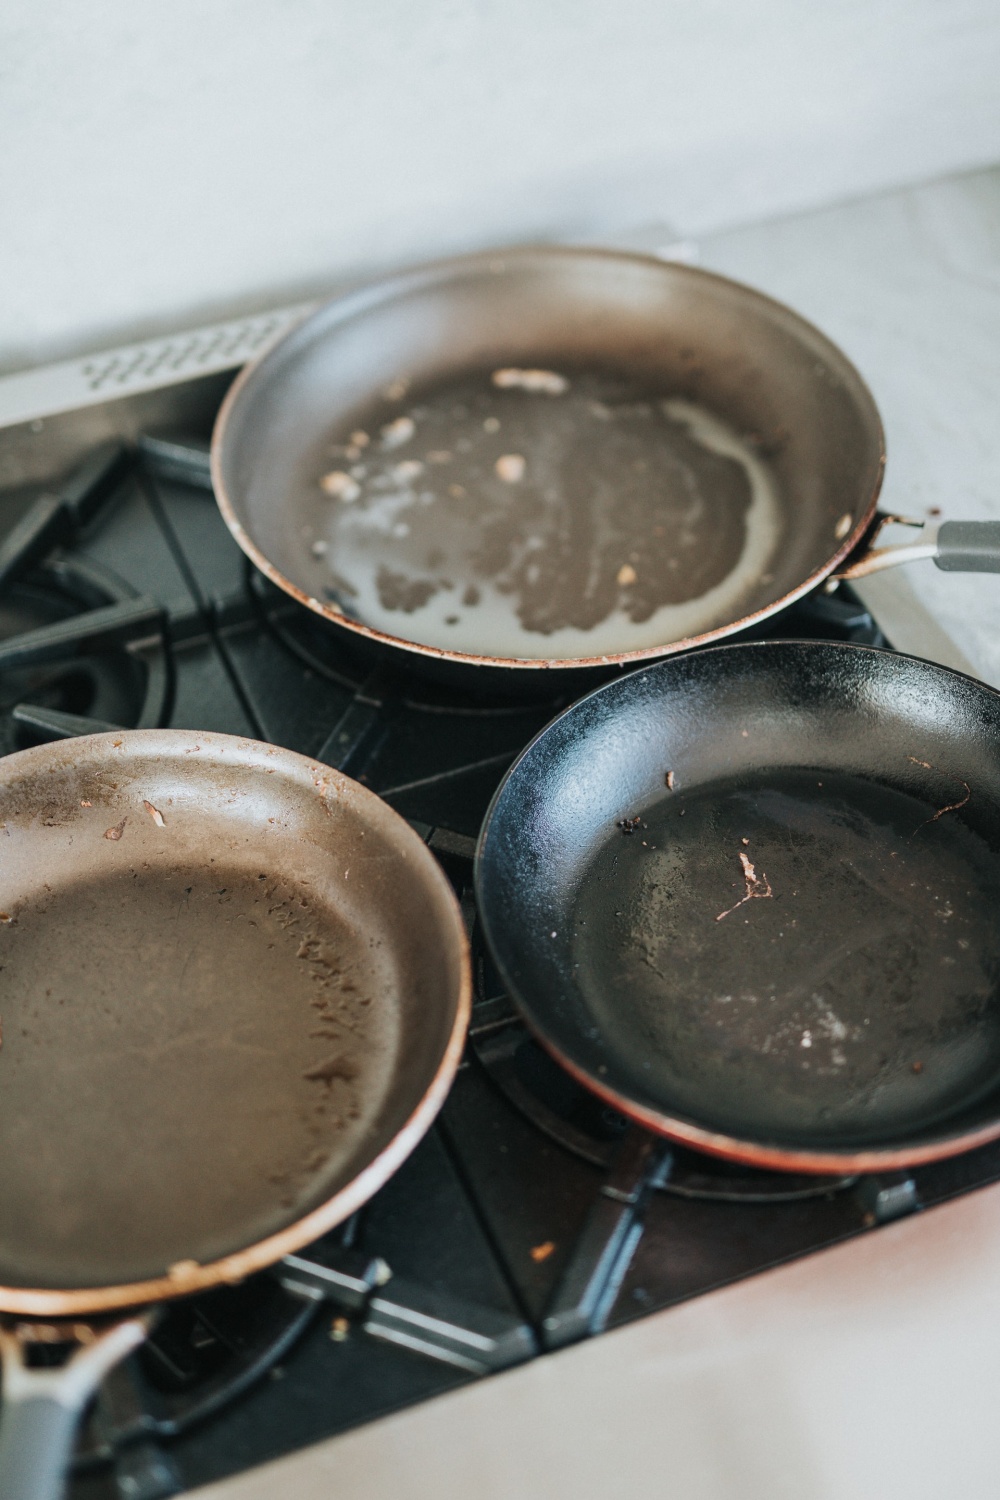 Scratches on Teflon Nonstick Pan May Release Plastic Particles: Study